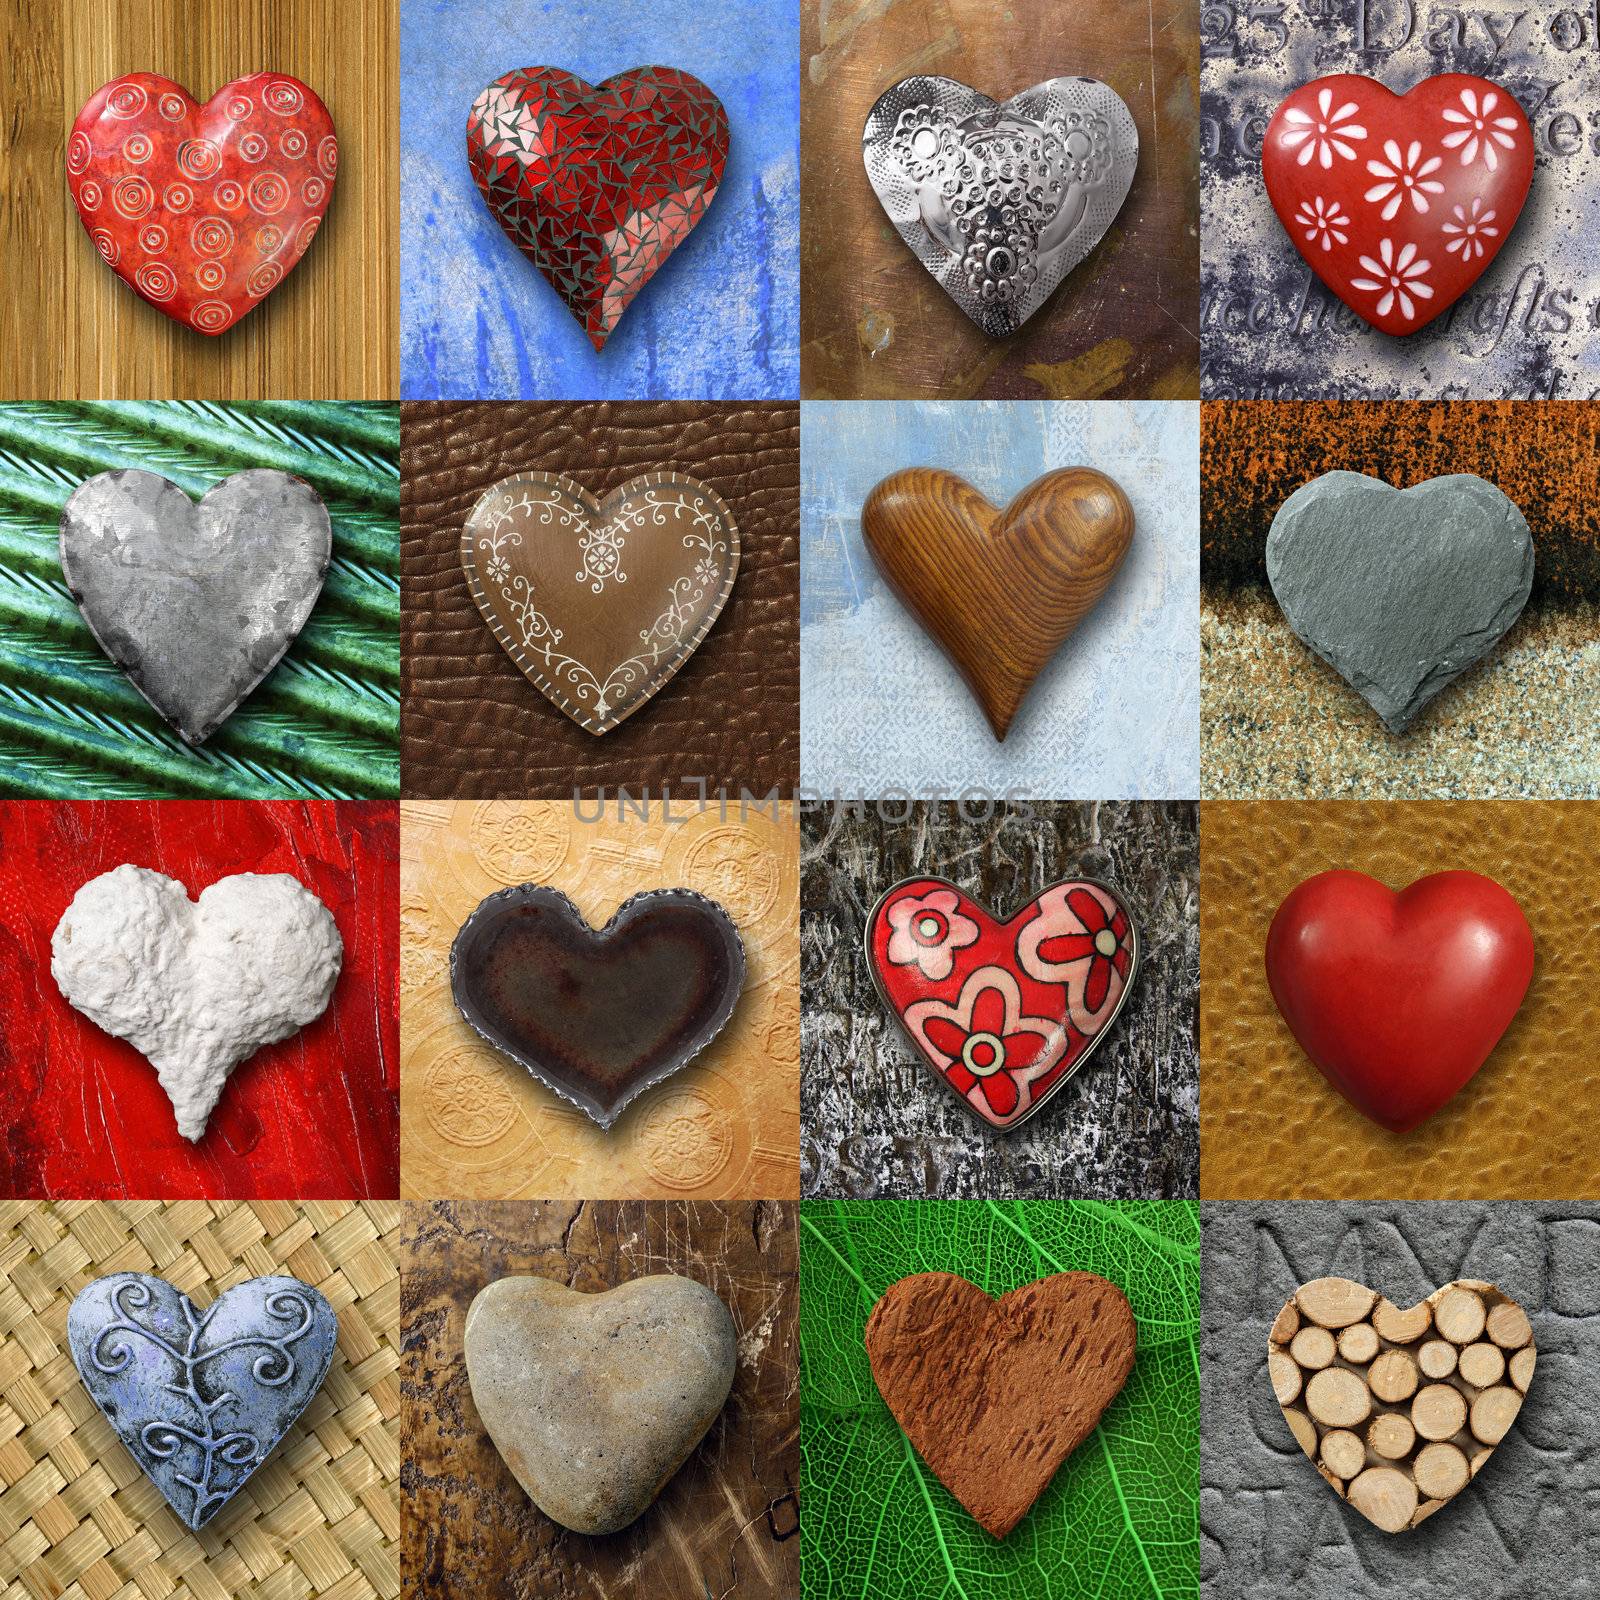 Hearts collage by sumners